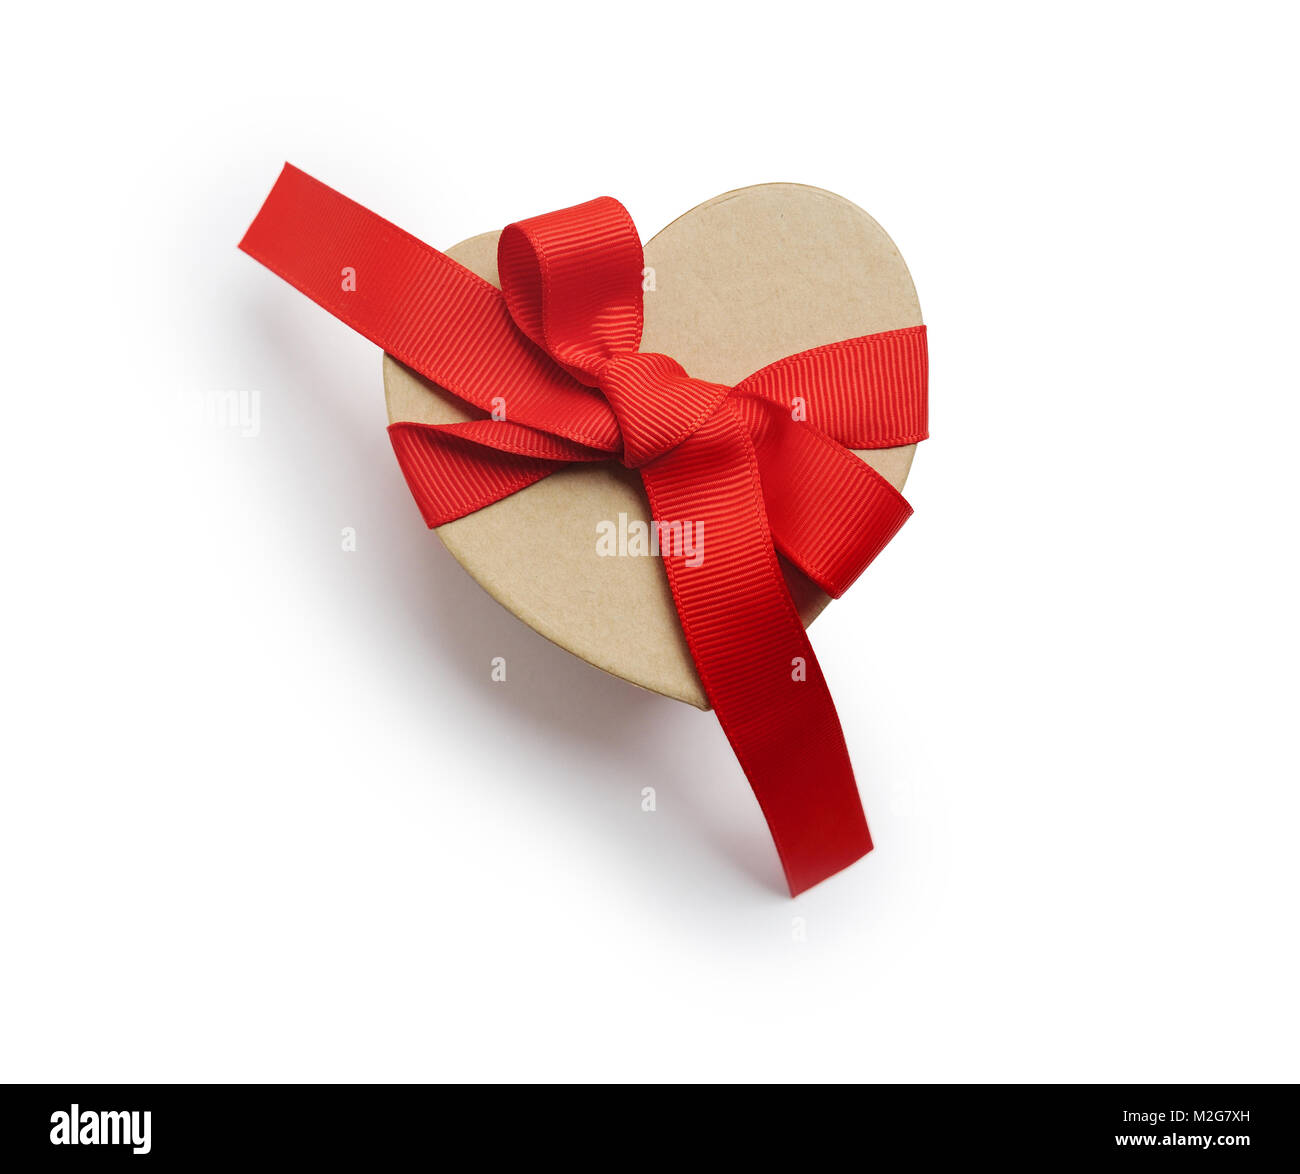 Wrapped vintage heart gift box with red ribbon bow, isolated clipping mask on white background, top view, illustration for valentine's day or wedding Stock Photo